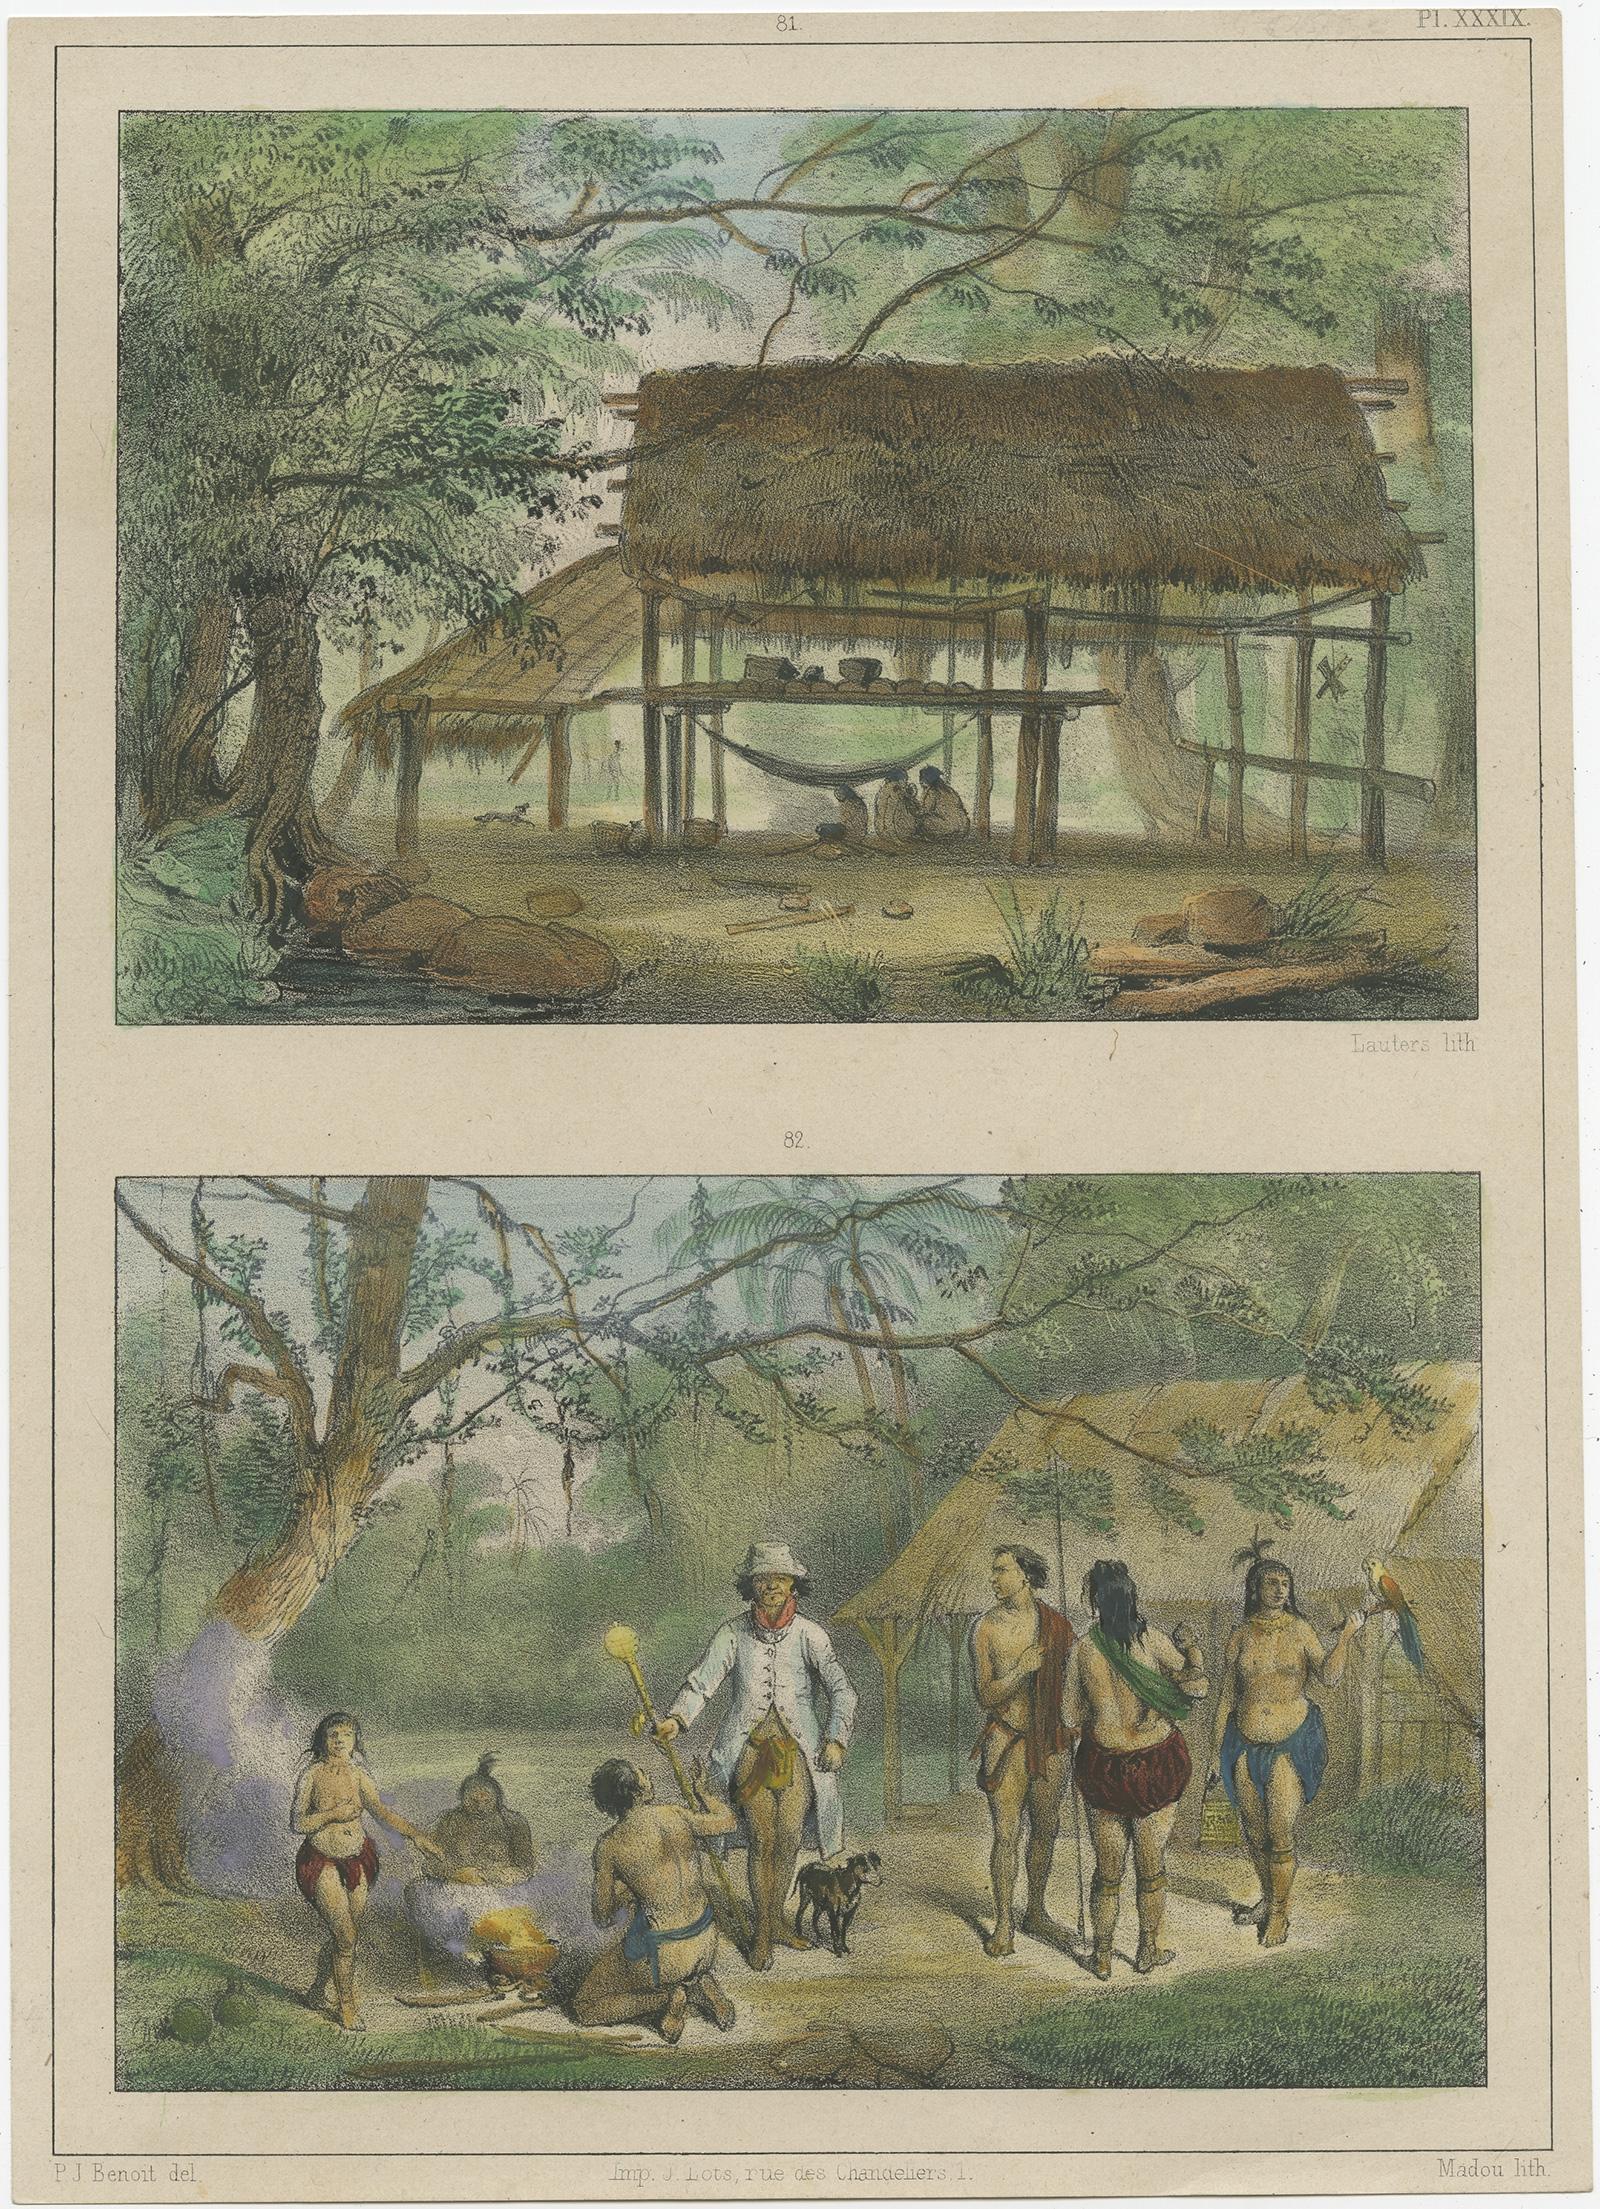 Antique print titled '81. Un Carbet. 82. Une famille'. 

Tinted crayon style lithograph on chine-collee (thin china paper) on wove (vellin) paper. It depicts a home for slaves and a slave family. This print originates from 'Voyage a Surinam.